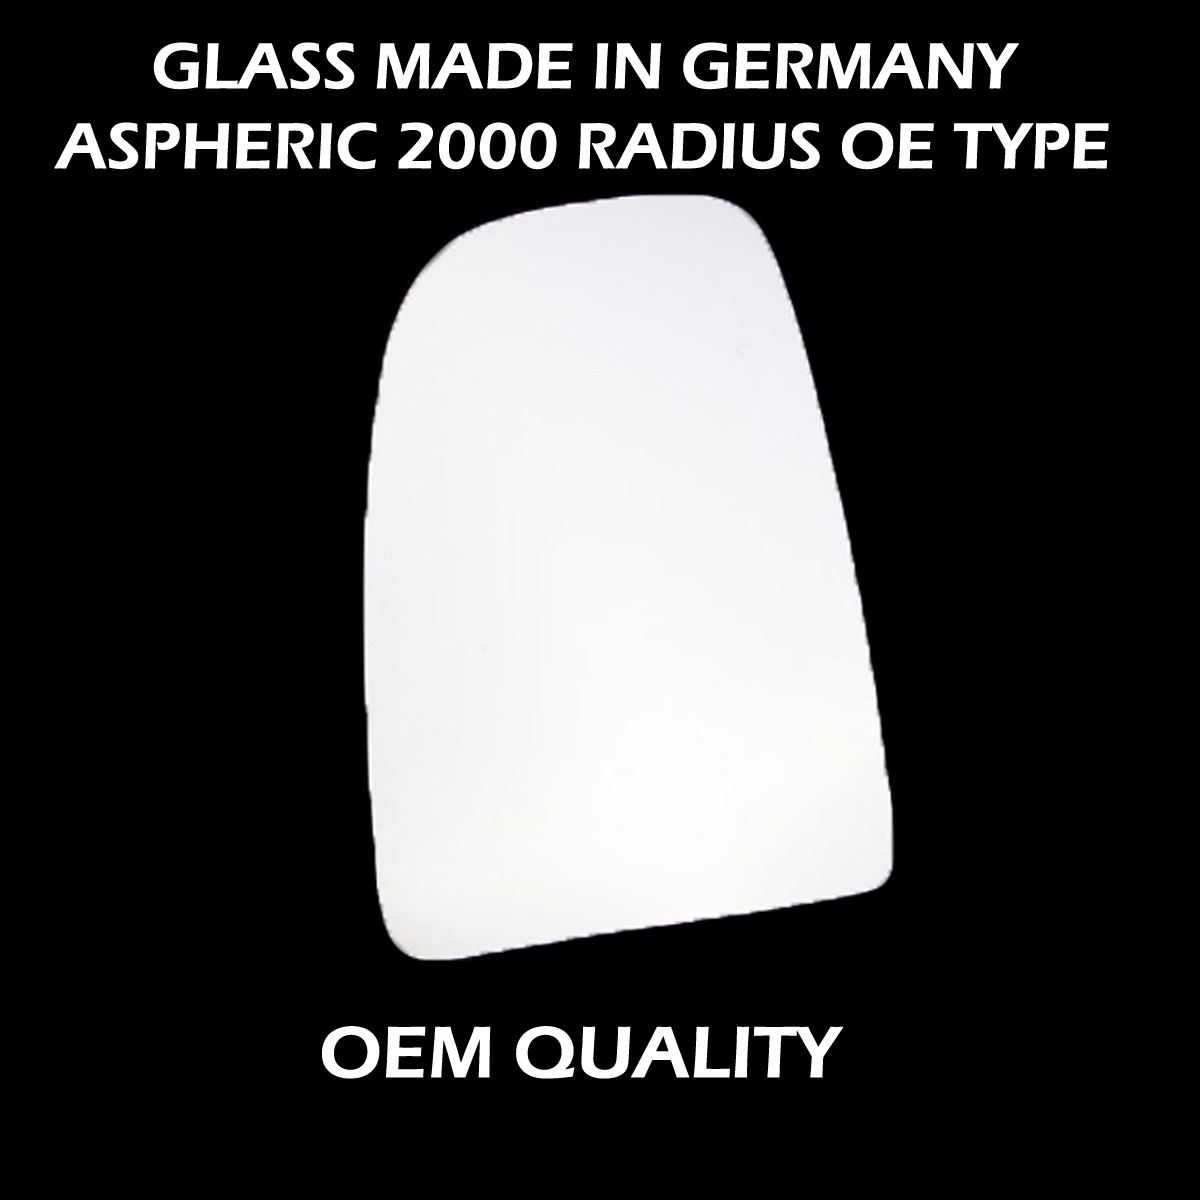 Peugeot Boxer Wing Mirror Glass LEFT HAND ( UK Passenger Side ) 2006 to 2020 – Convex Wing Mirror